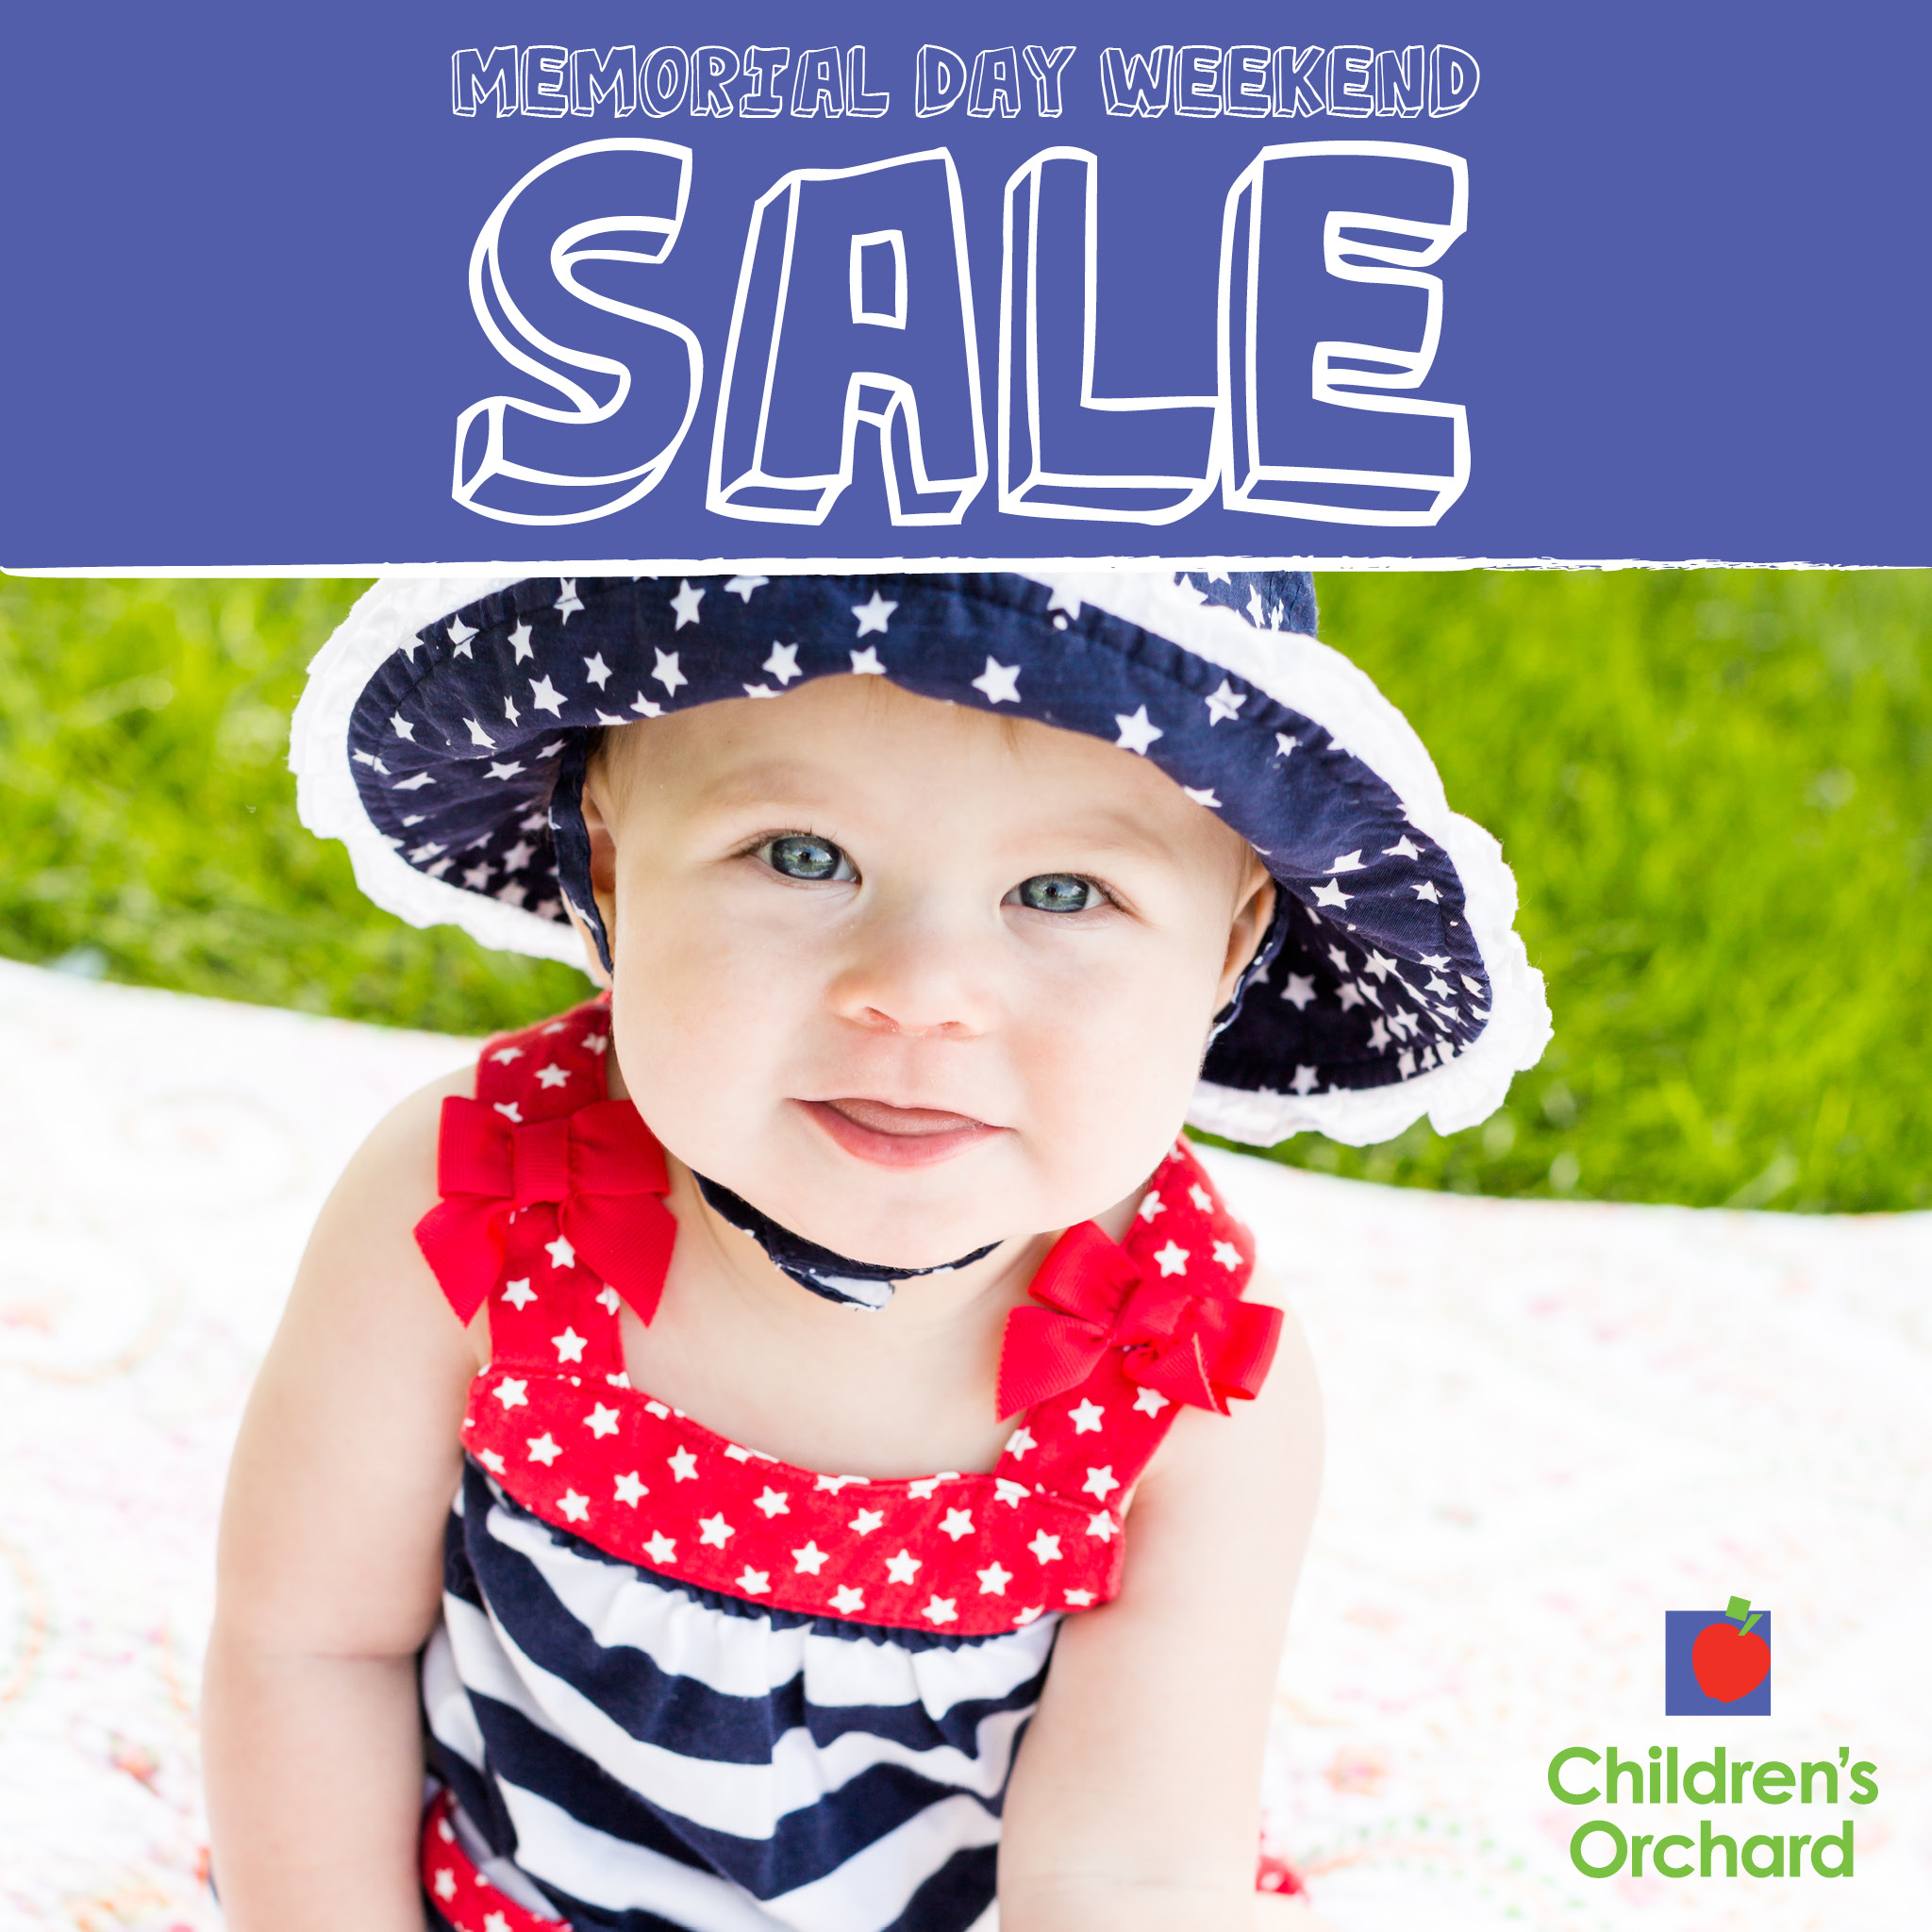 Memorial Day Sale. Baby wearing star patterned bucket hat with matching hat sitting on a blanket outside.